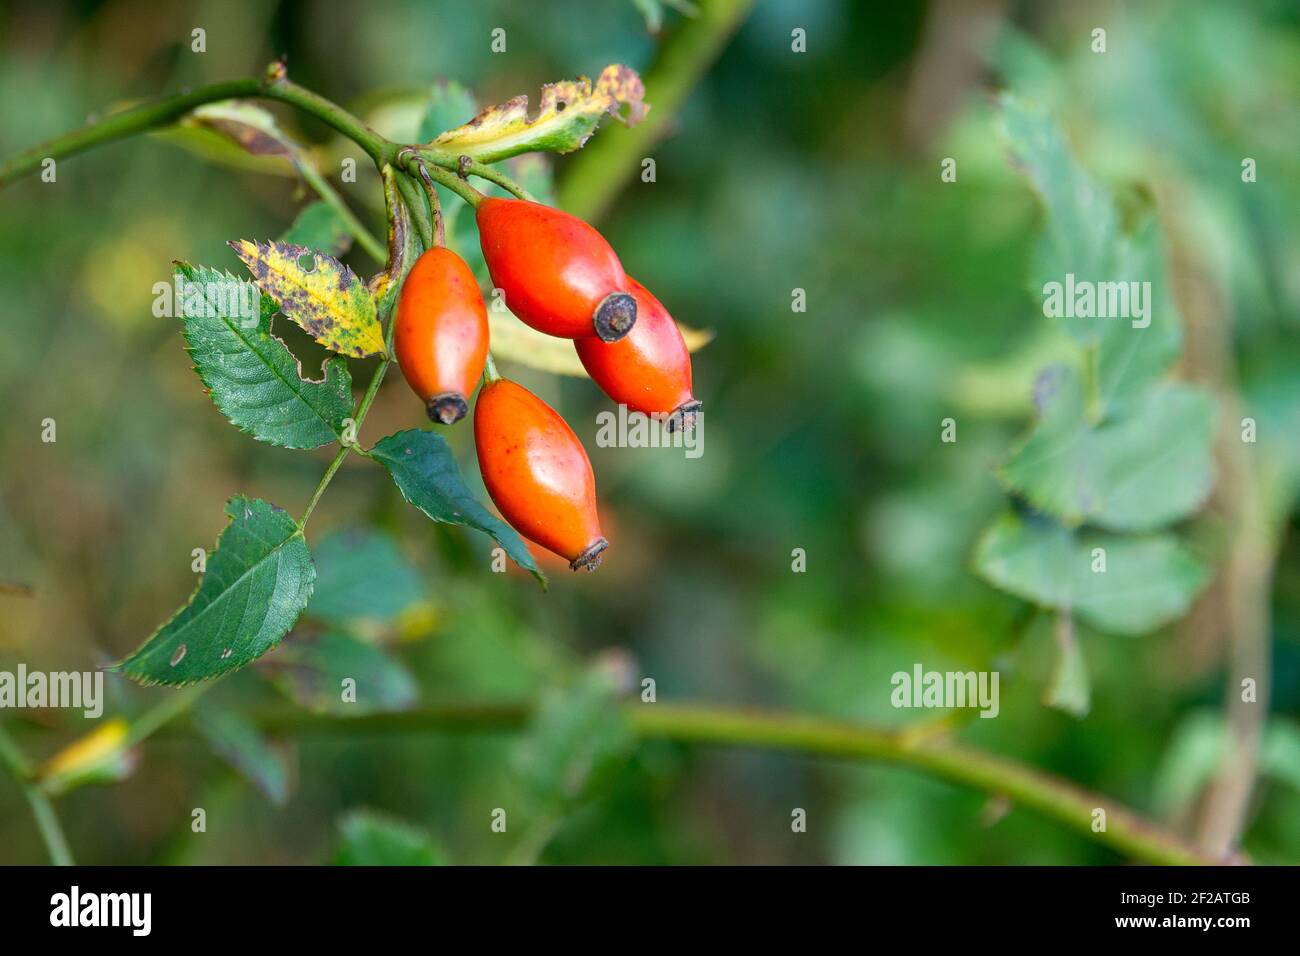 Rose hip berries on a branch Stock Photo